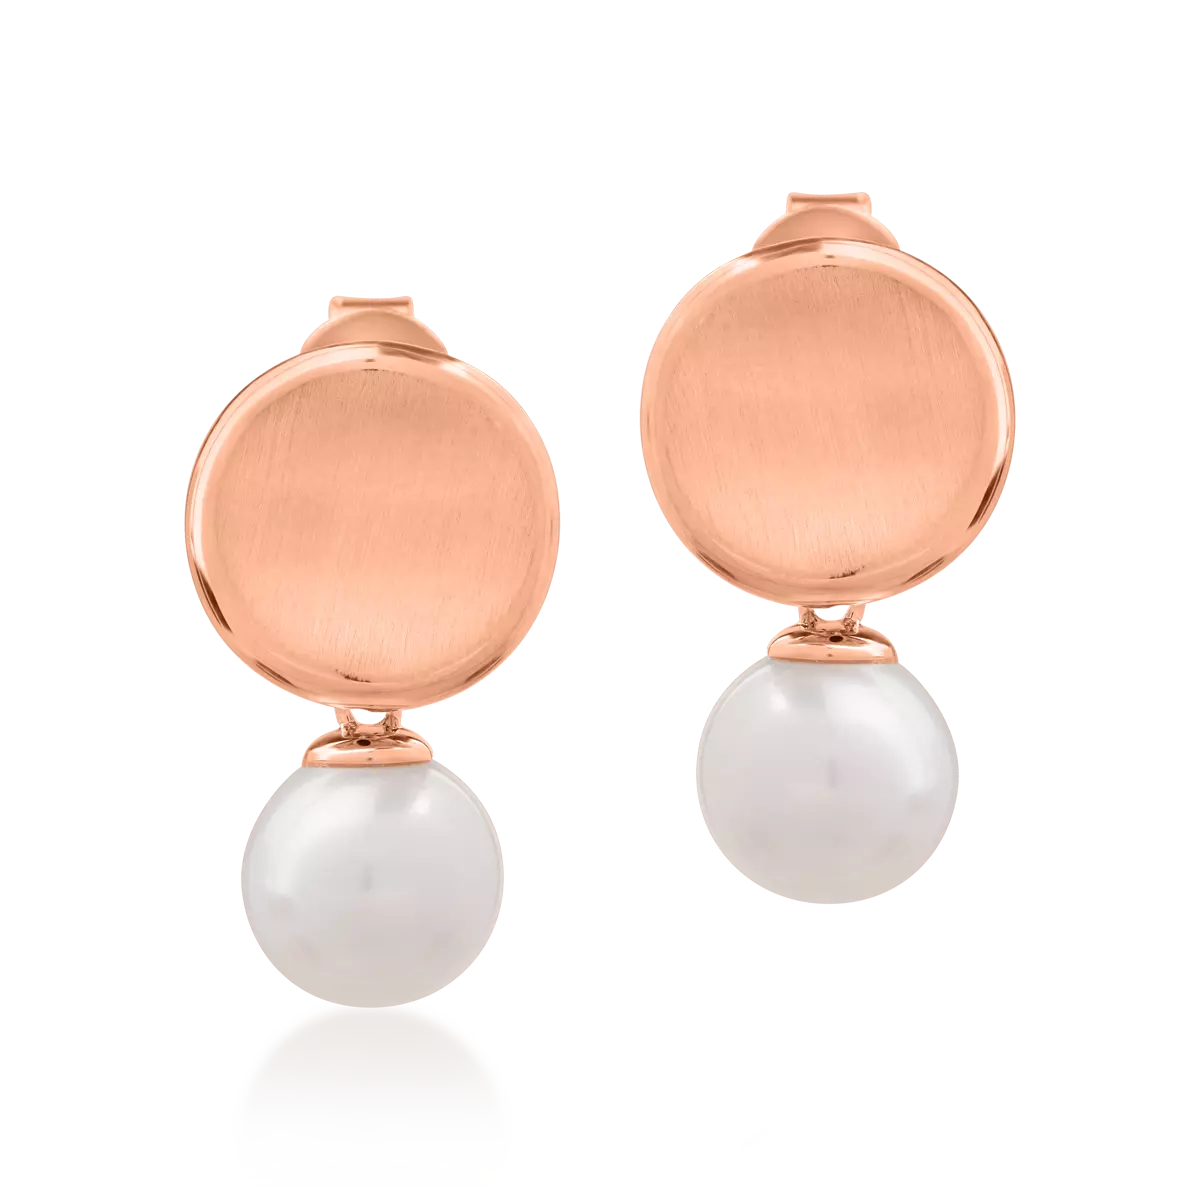 18K rose gold earrings with 6.475ct fresh water pearls